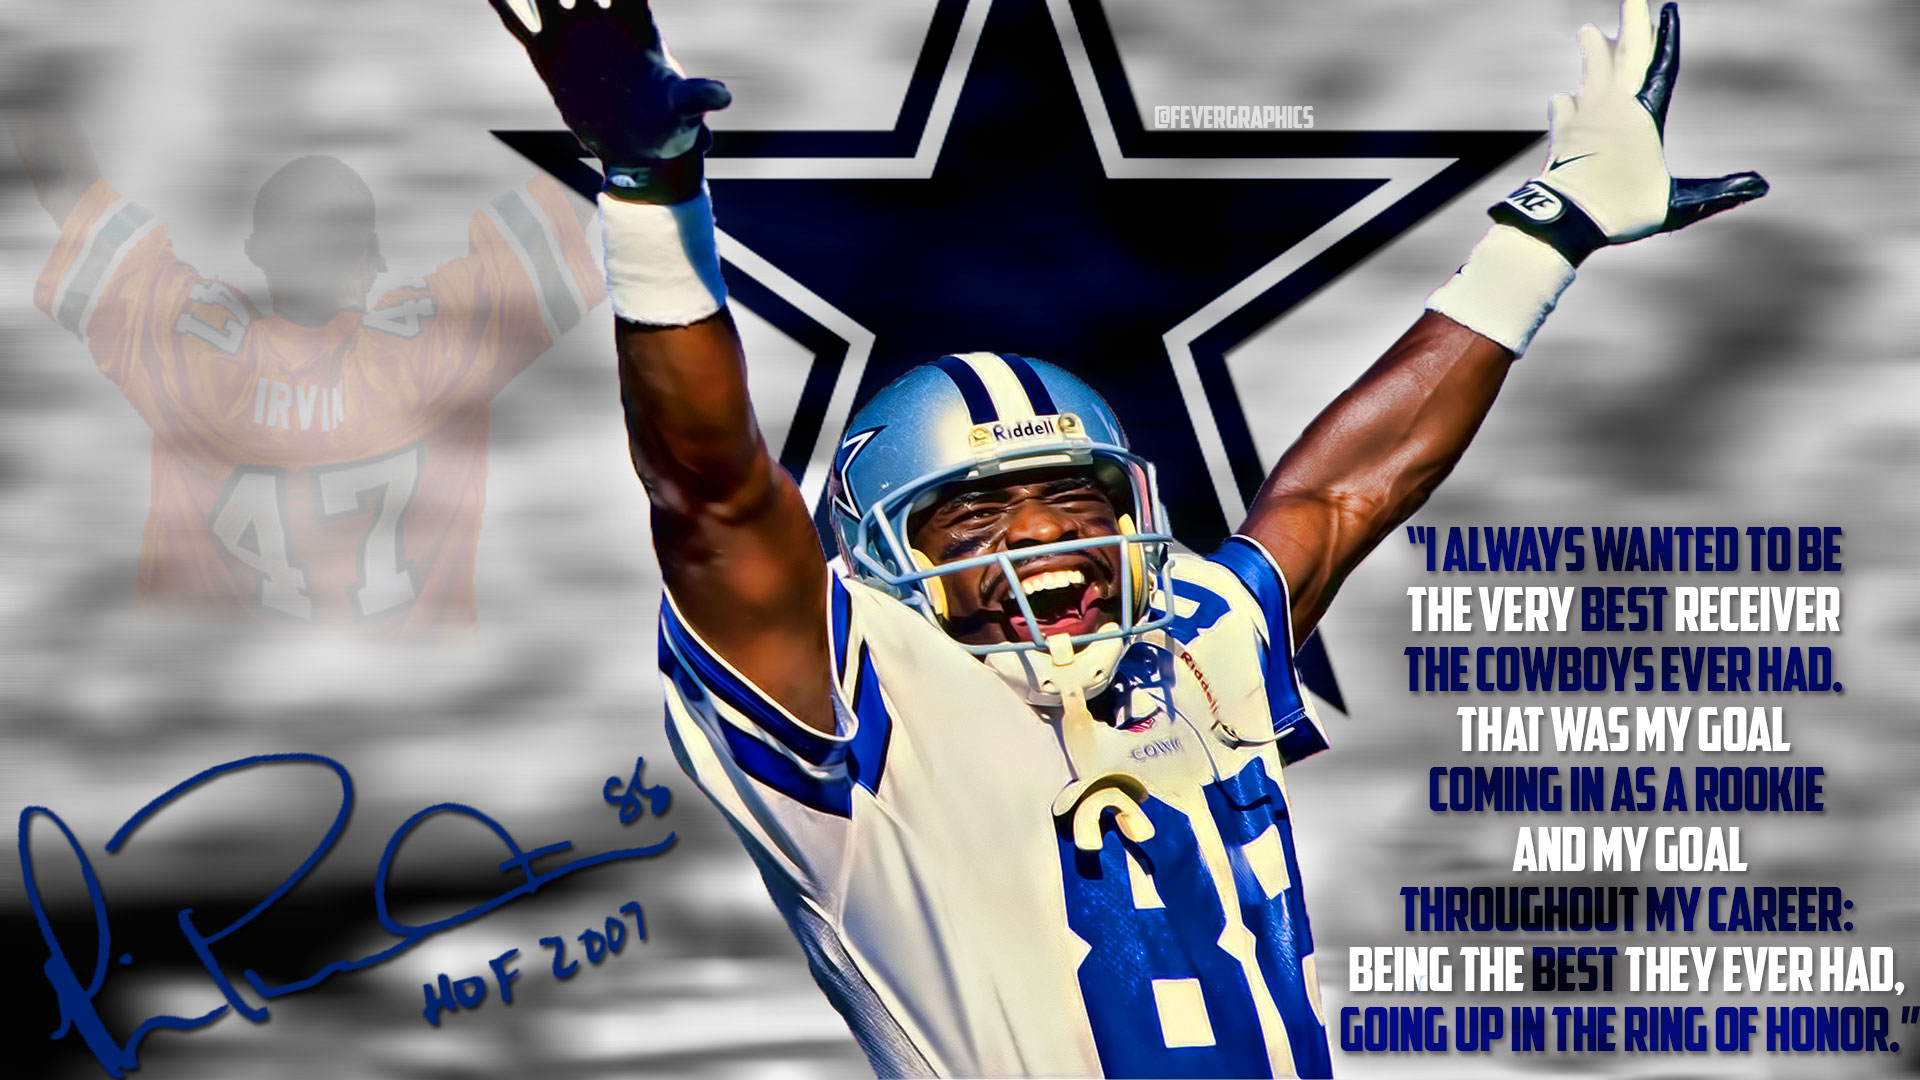 Cowboys sub! I made you guys a Michael Irvin wallpaper, I hope you guys like it! If there's anything you'd want me to change let me know and I'll try